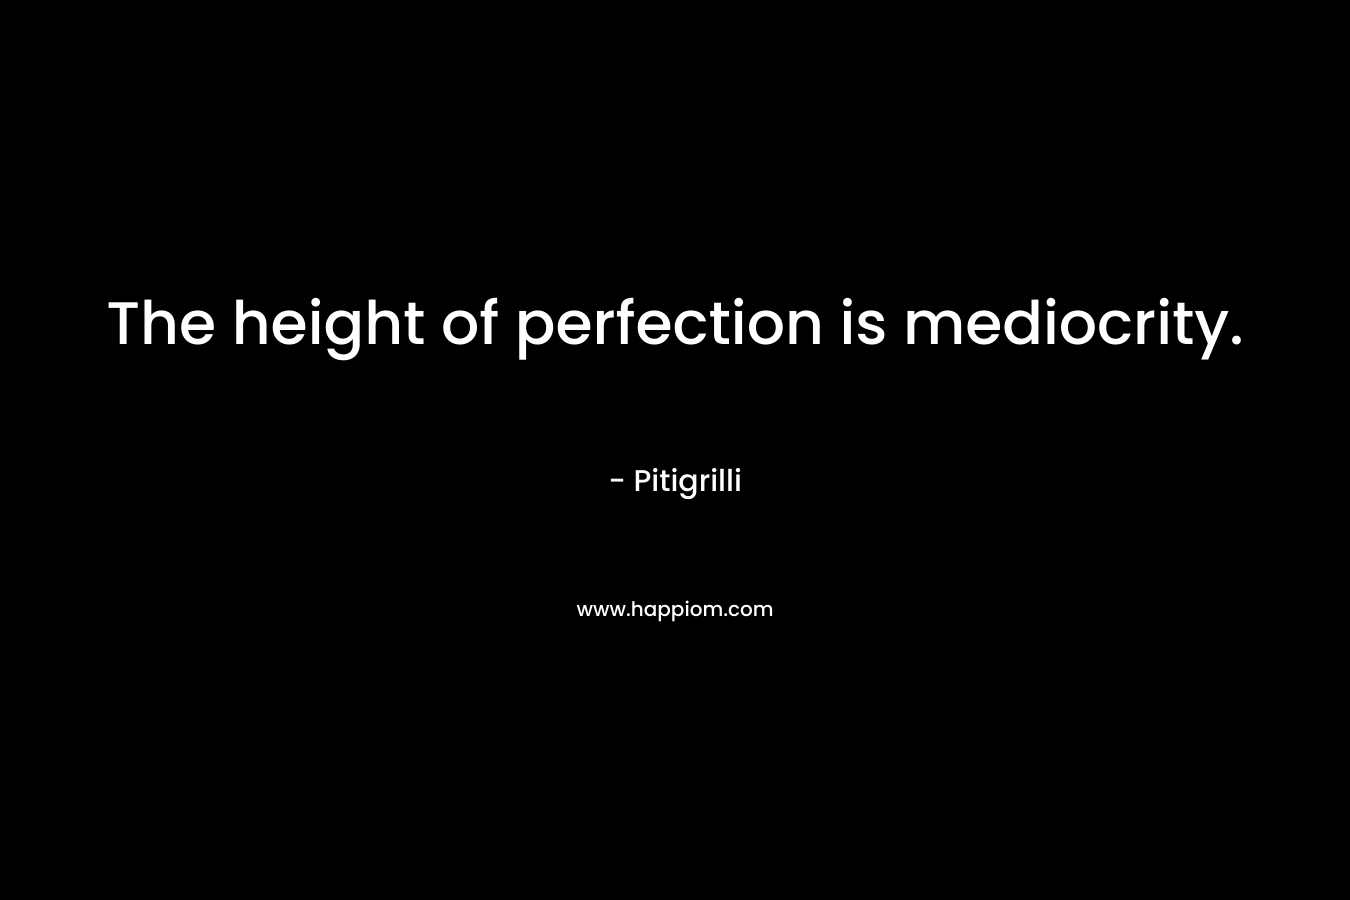 The height of perfection is mediocrity. – Pitigrilli